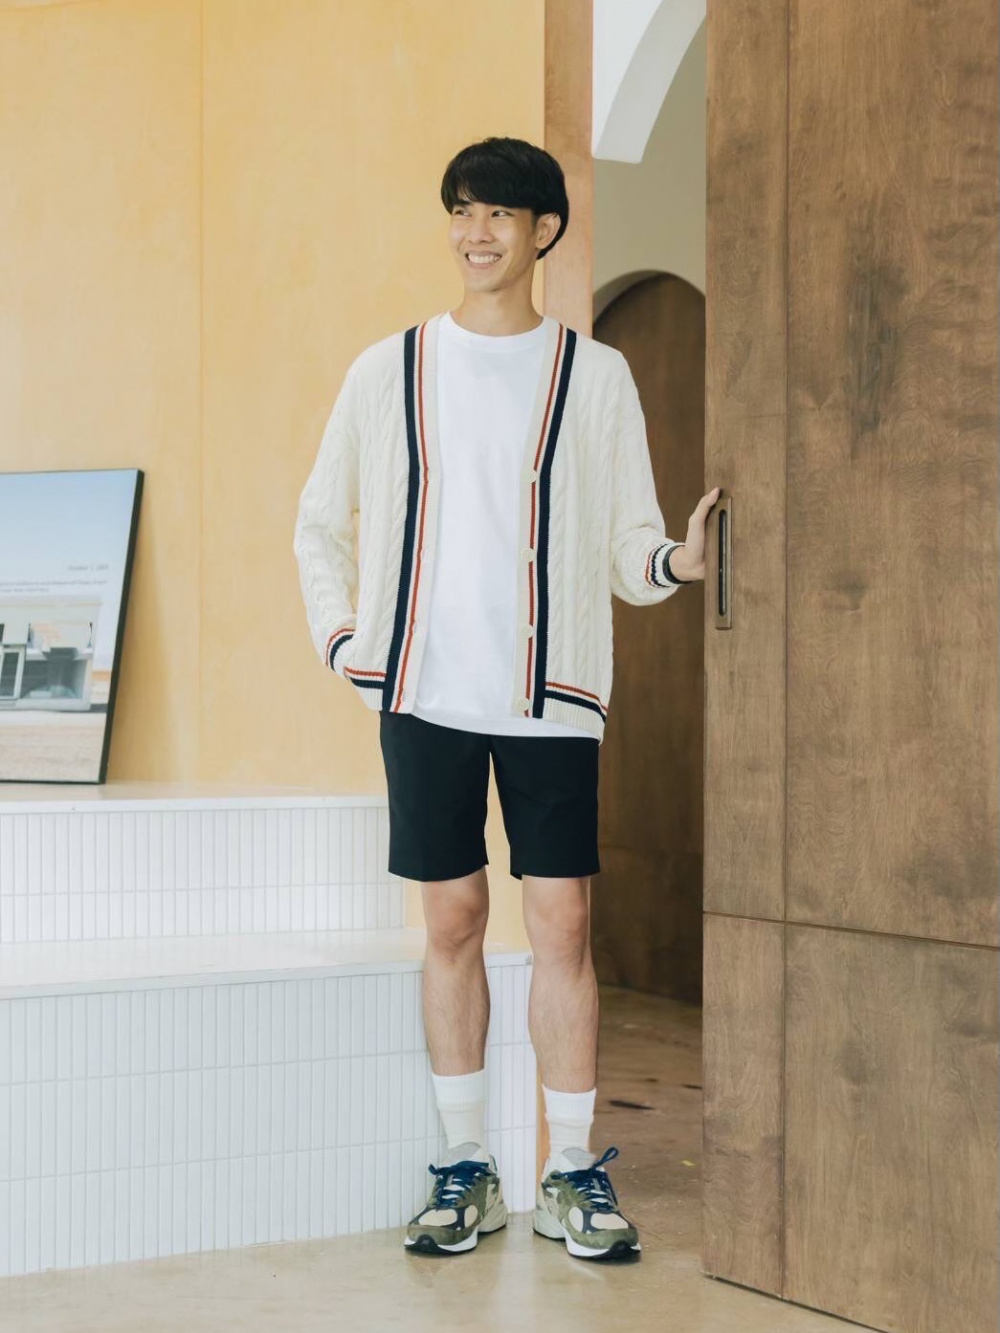 Check styling ideas for「JW Anderson Dry Pique Short Sleeve Polo